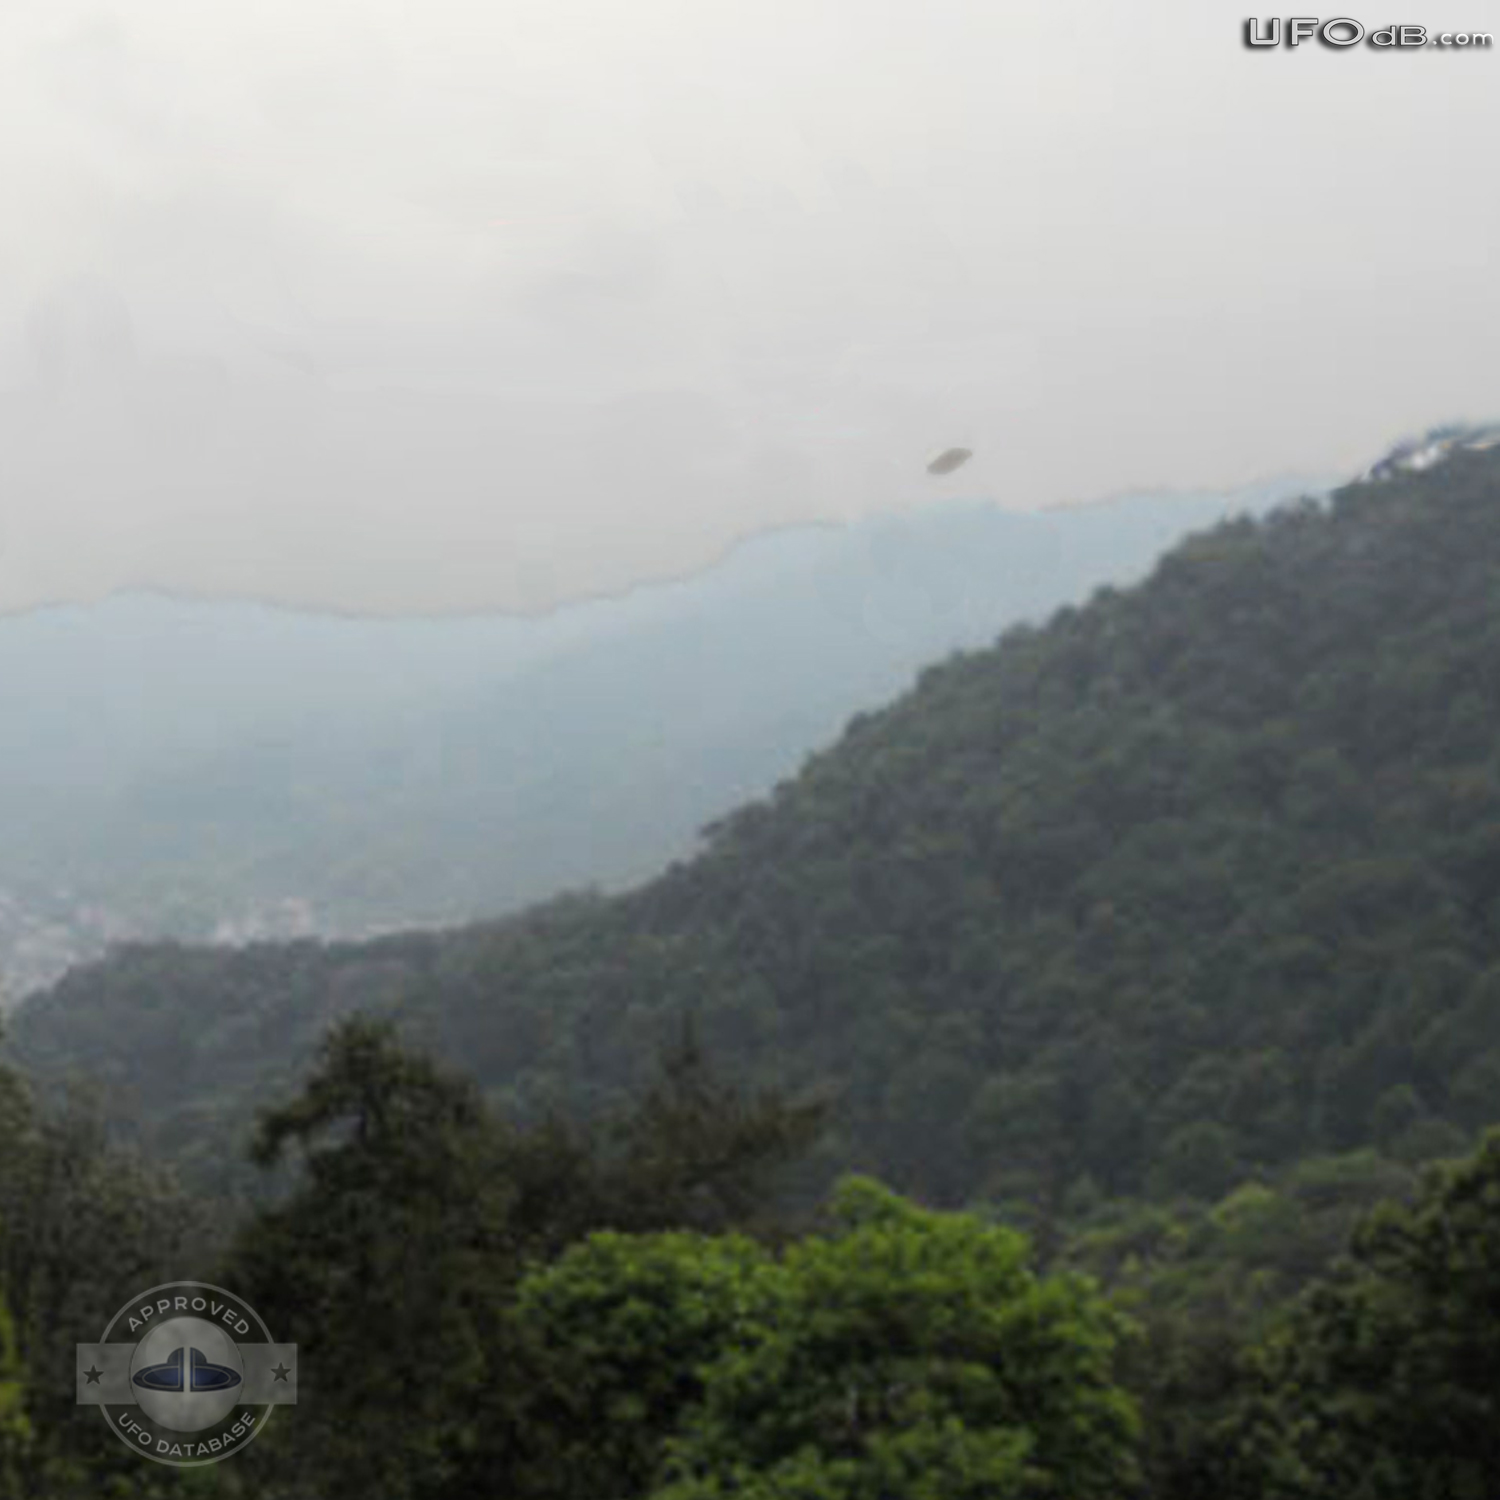 Humming whirring sounds heard with UFO picture | Hangzhou | April 2011 UFO Picture #332-3